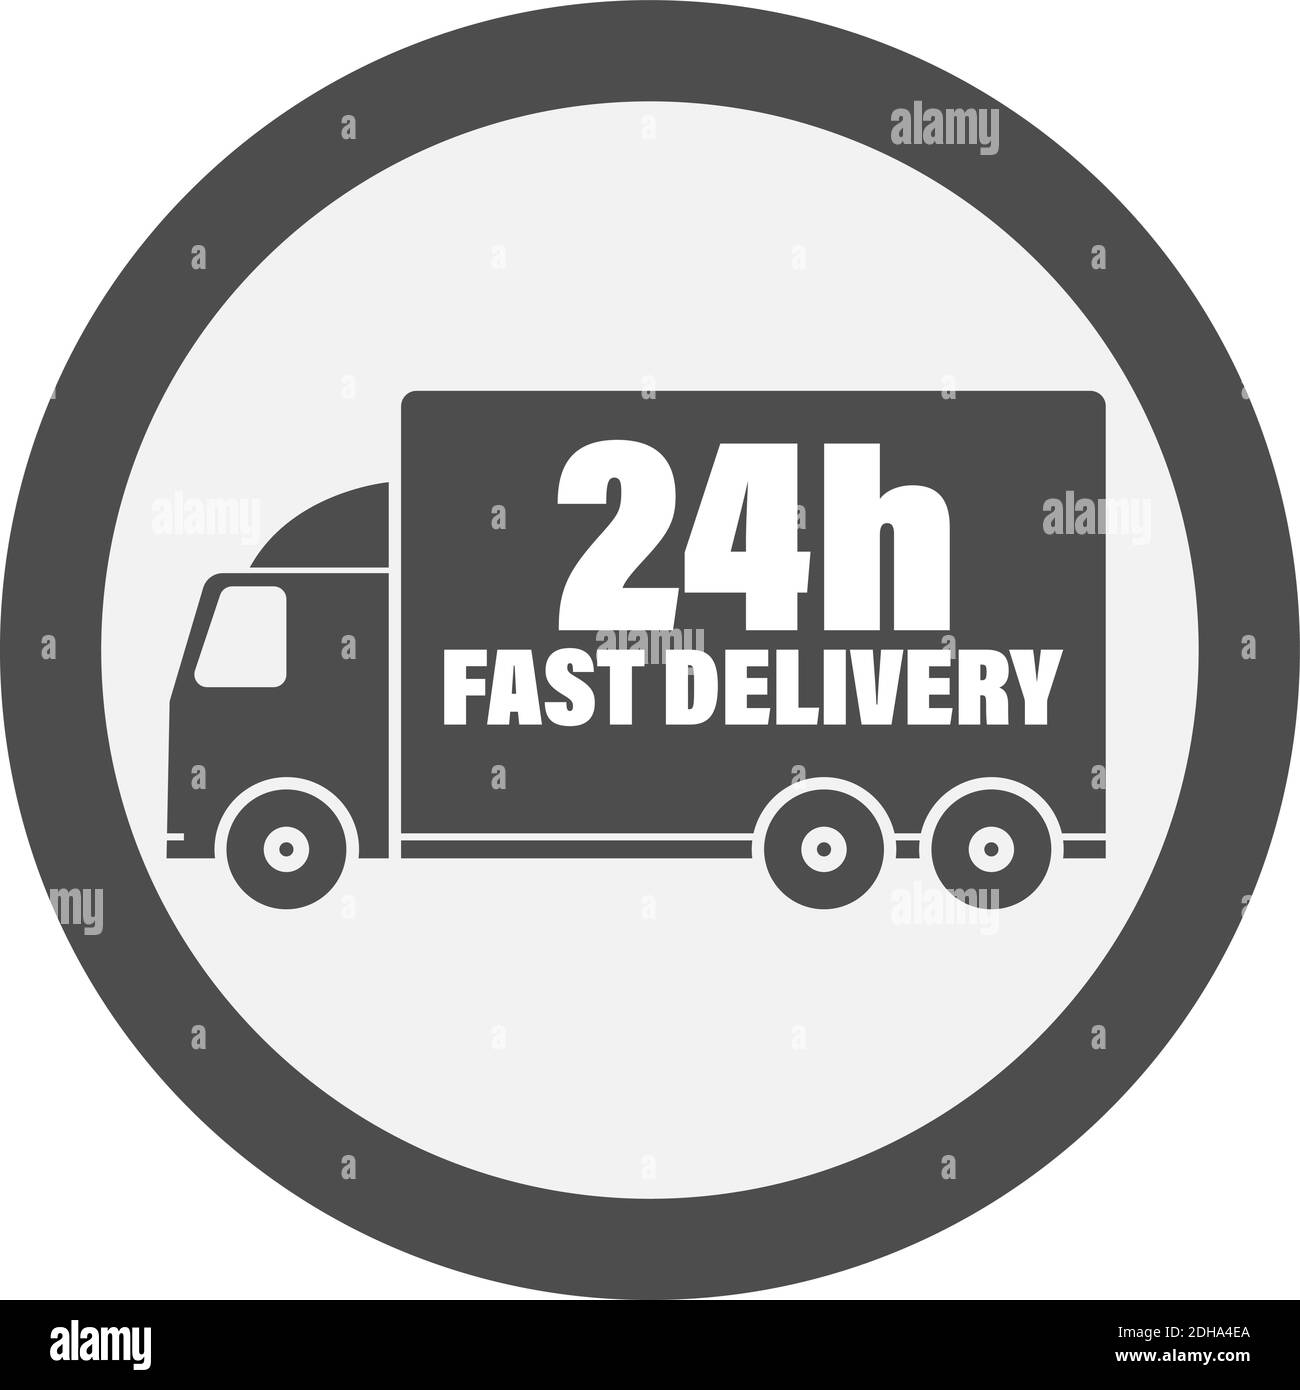 fast or express 24 hour delivery icon with delivery truck vector illustration Stock Vector